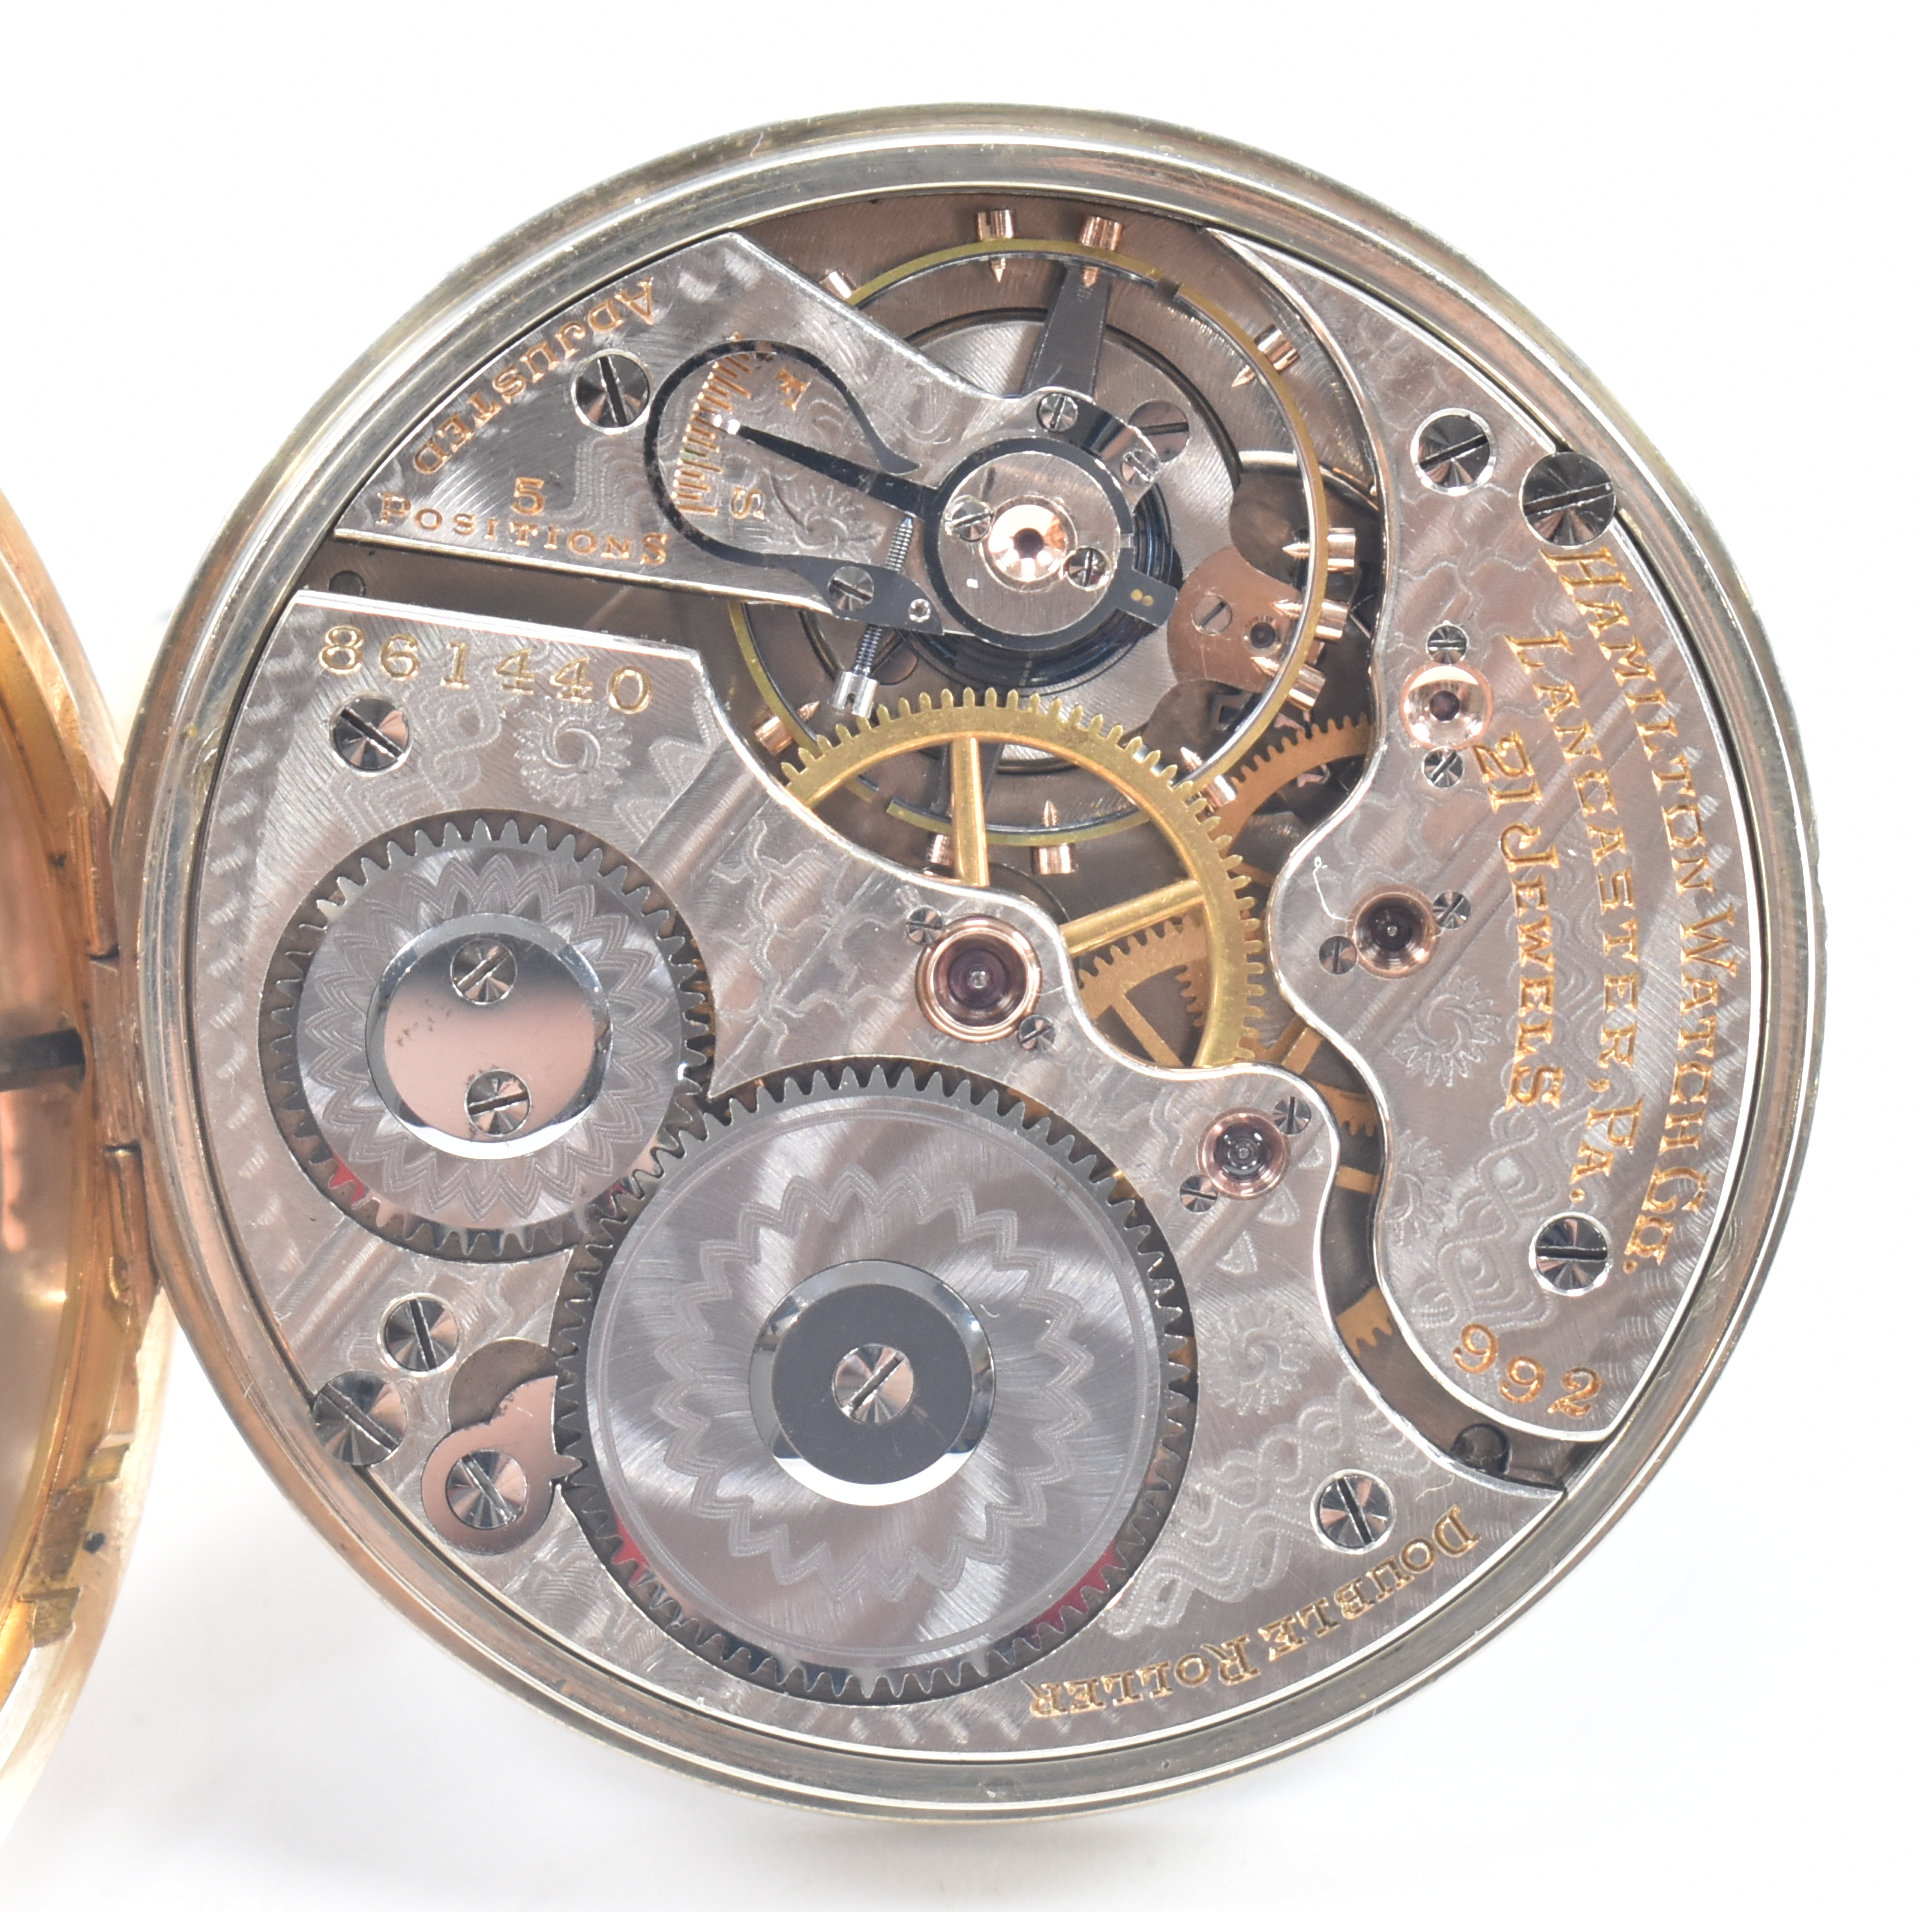 ANTIQUE HAMILTON WATCH COMPANY GOLD PLATED POCKET WATCH - Image 5 of 9